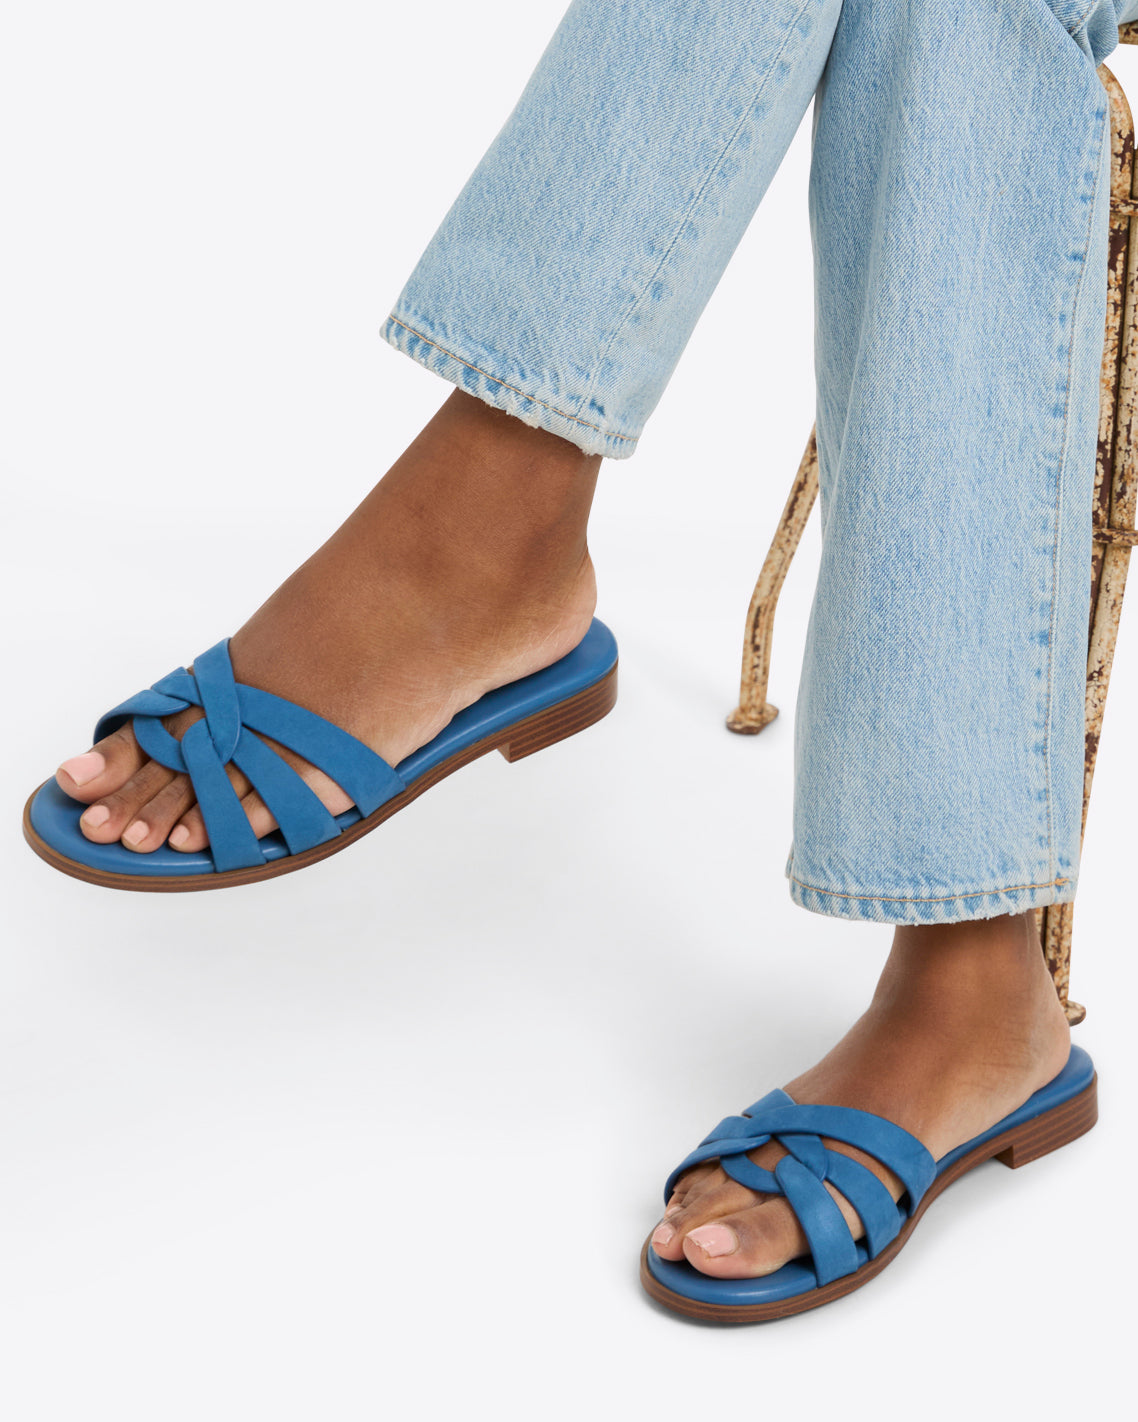 Andy Sandal in Blue